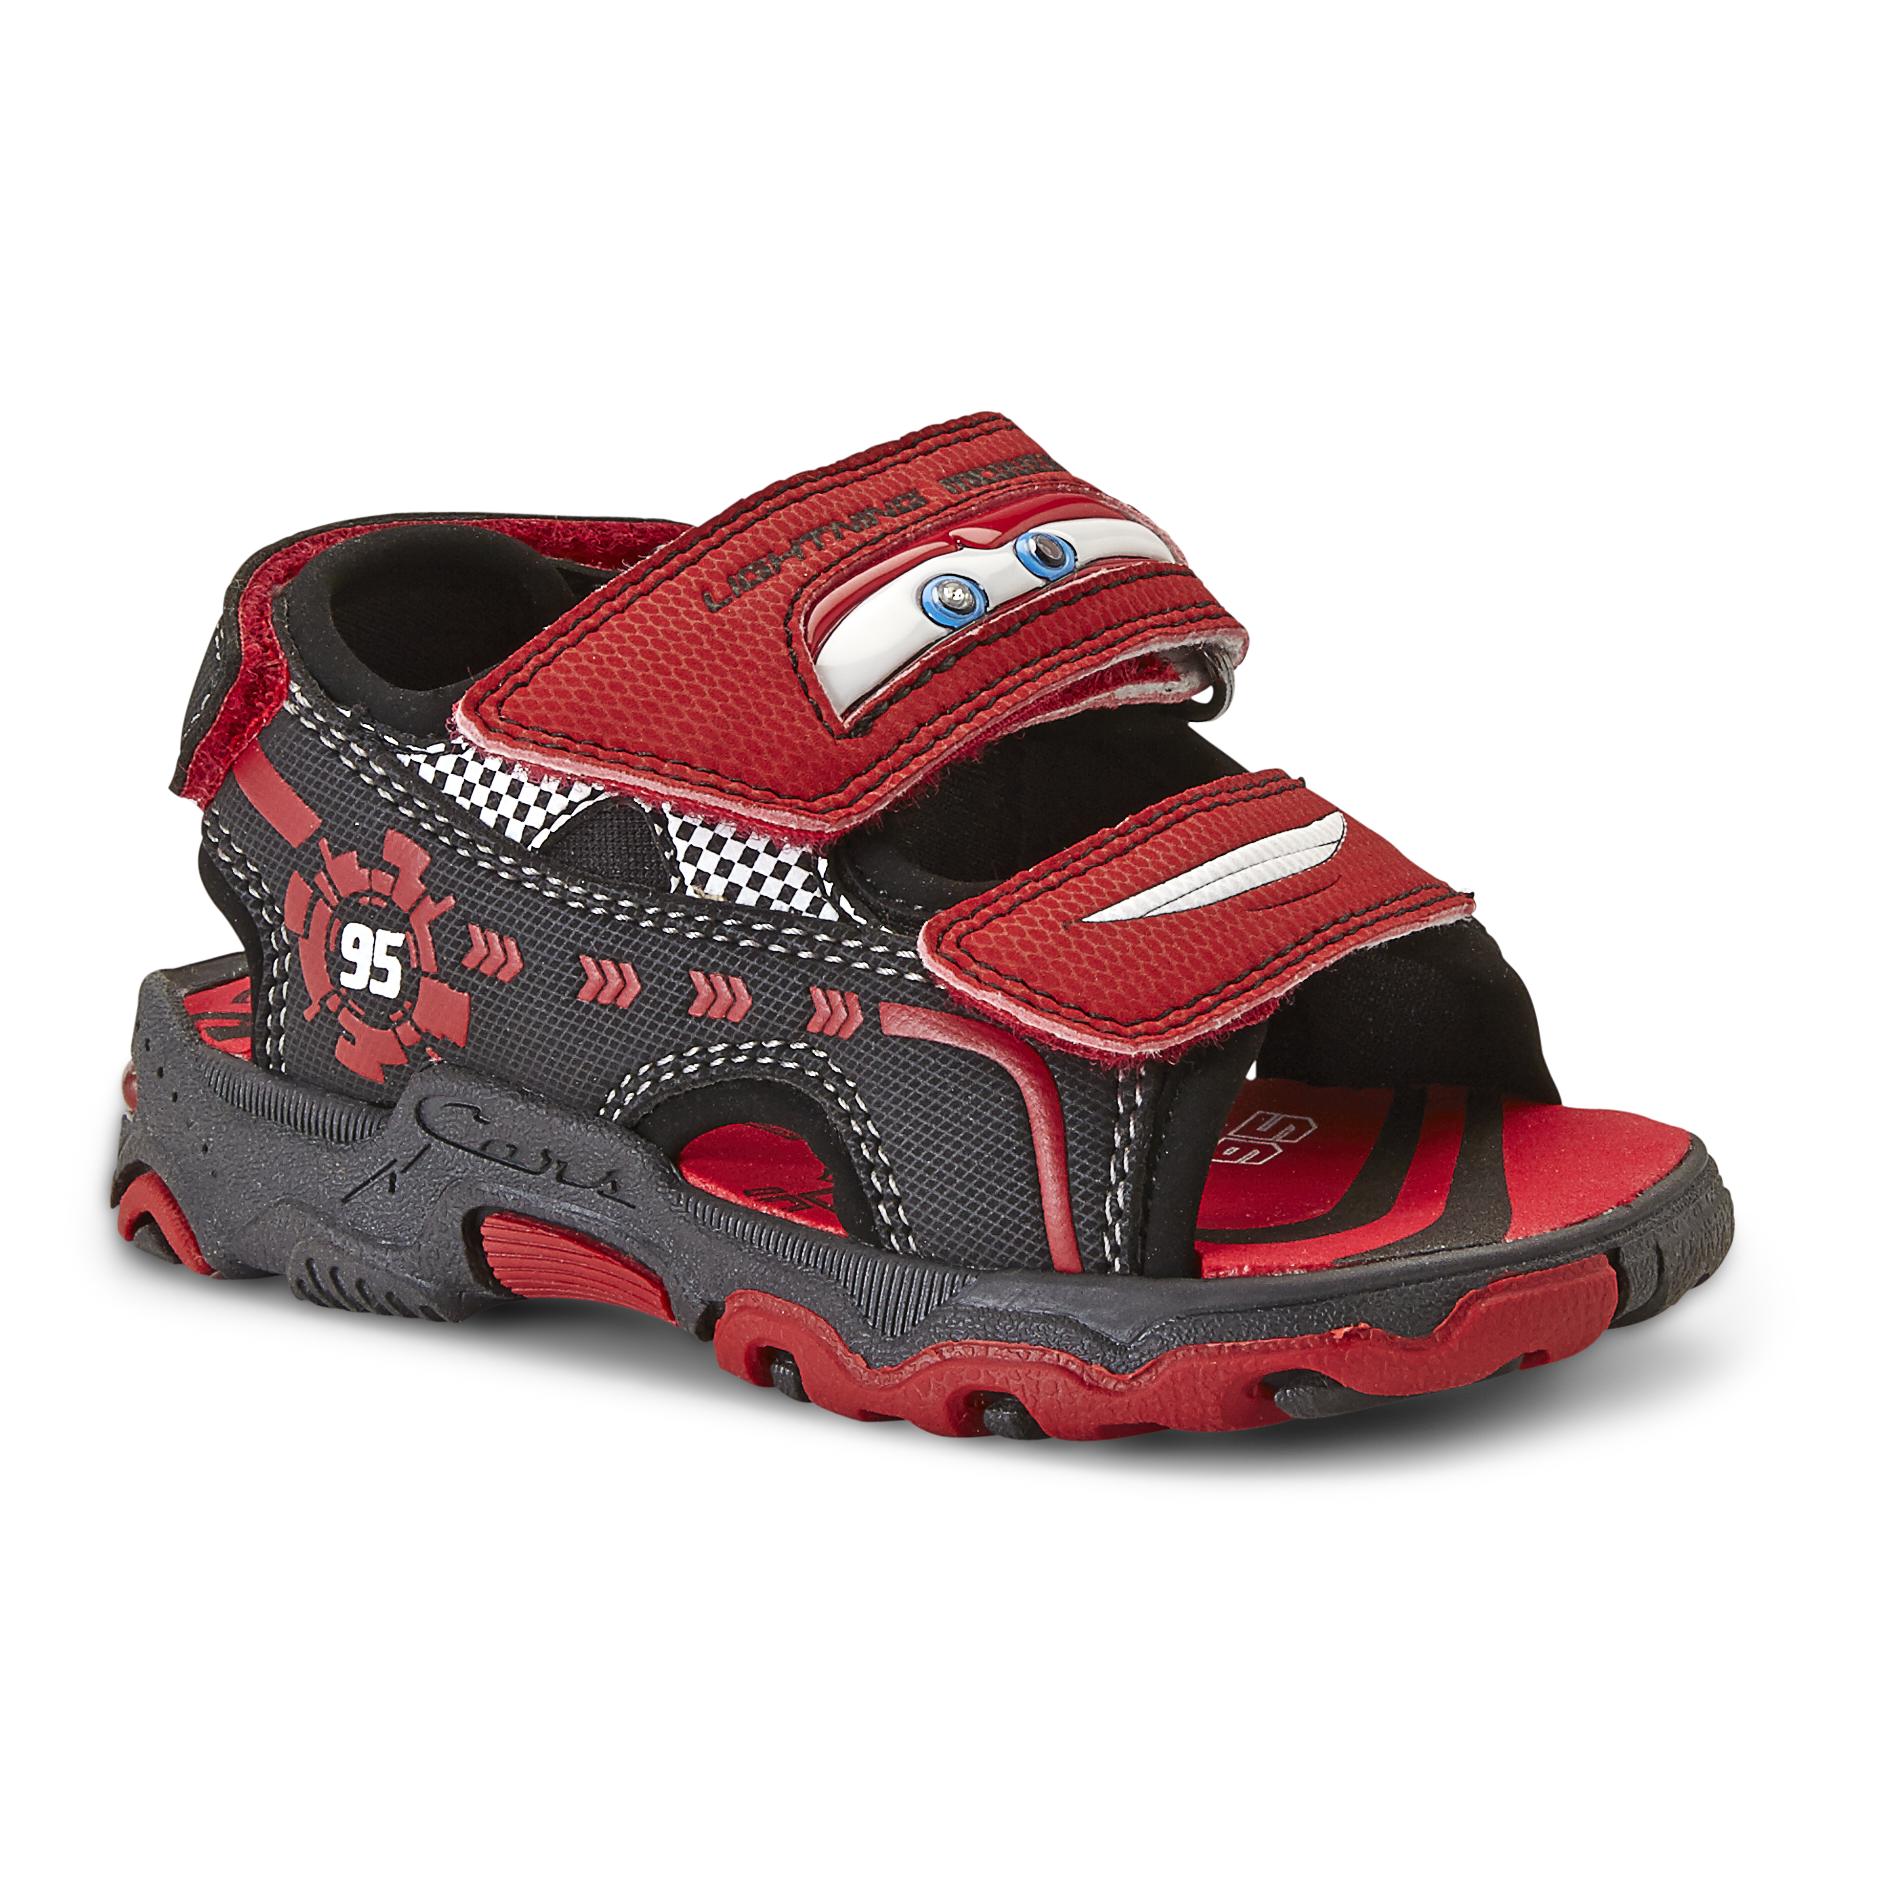 Disney Cars Boy's Red/Black Light-Up Athletic Sneakers